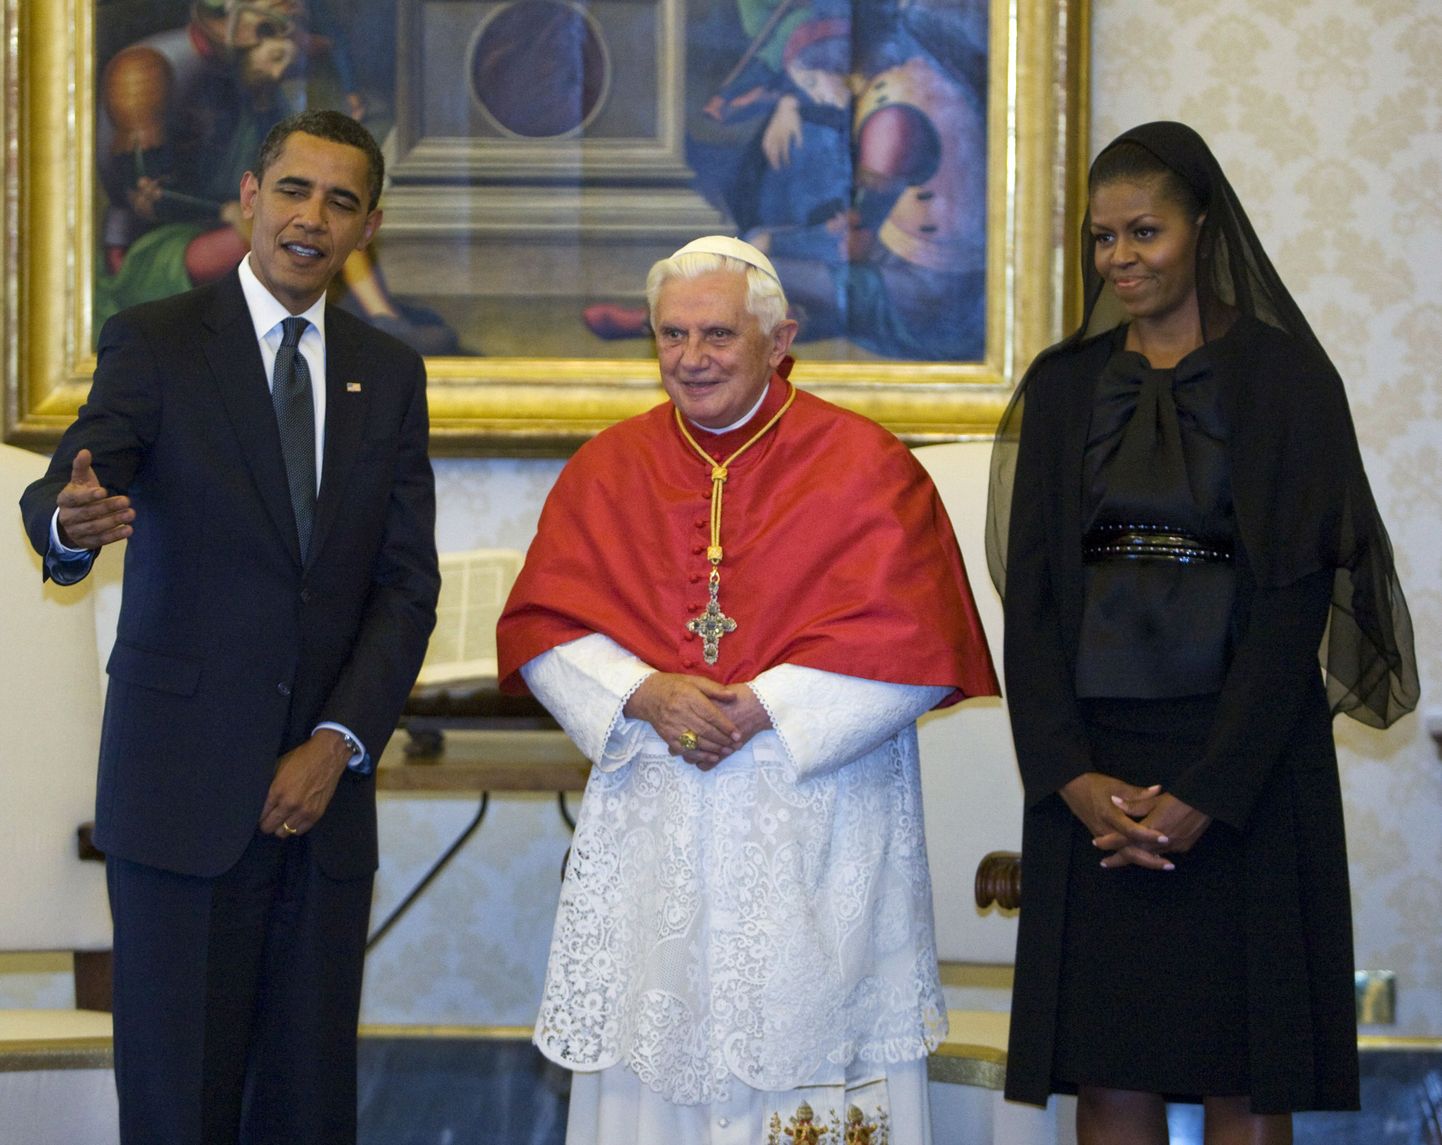 Pope Benedict XVI stands with U.S. President Barack Obama (L) and first lady Michelle Obama during their meeting in the pontiff's private library at the Vatican July 10, 2009. 
REUTERS/Chris Helgren        (VATICAN)